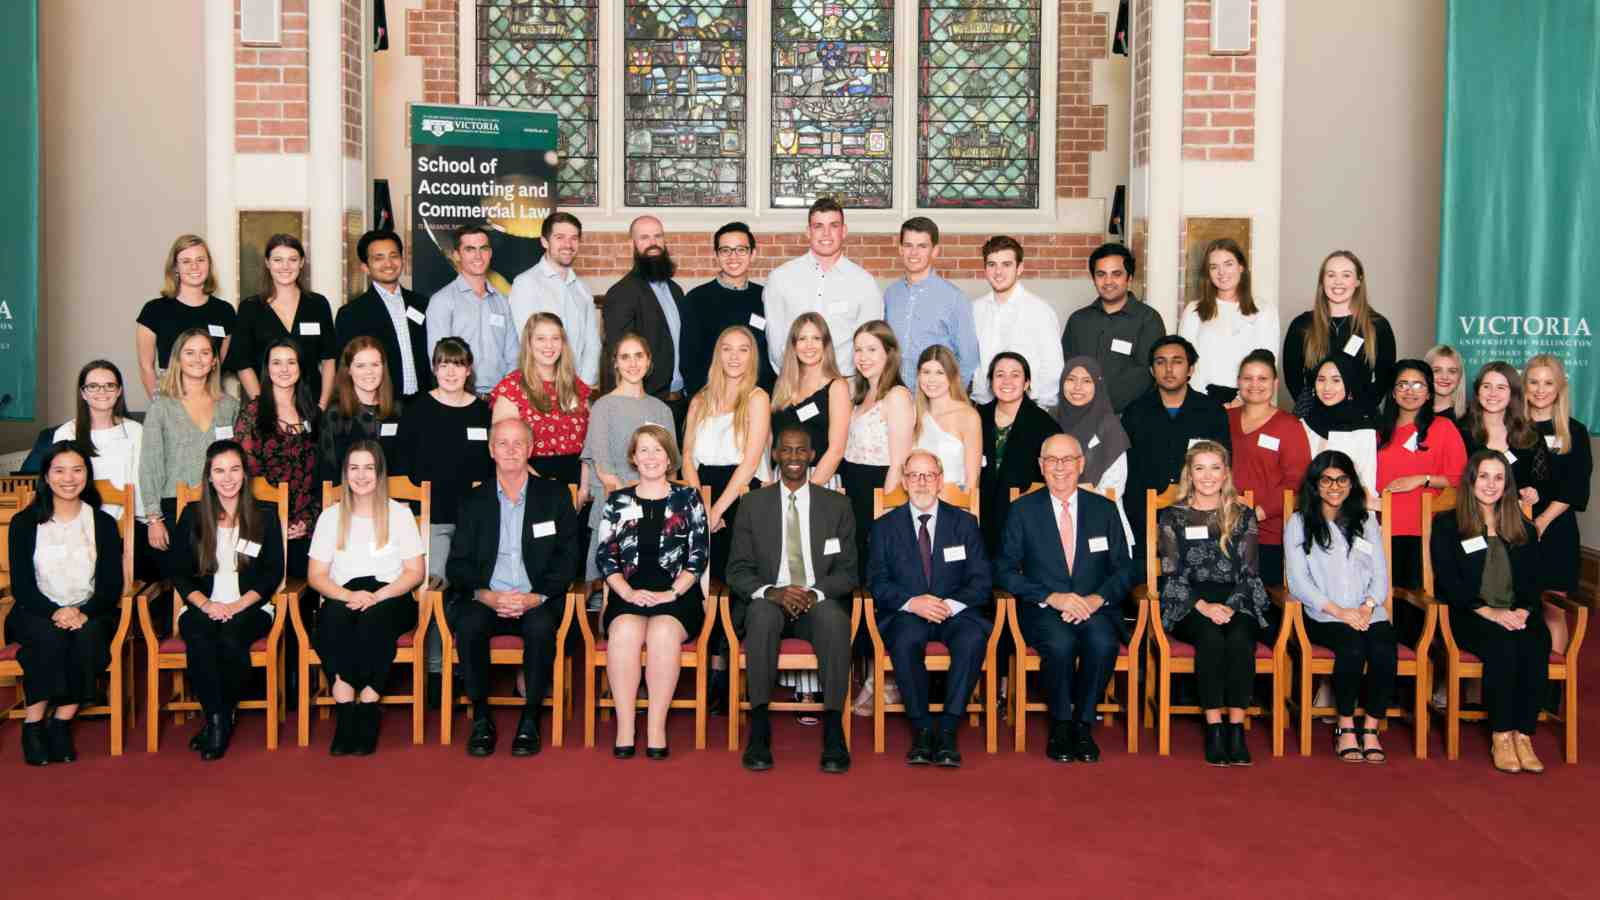 Student prize-winners, sponsor representatives, and (front row, centre) Pro-Vice-Chancellor and Dean of Commerce, Professor Ian Williamson; Professor Ian Eggleton, Head of the School of Accounting and Commercial Law and Warren Allen, CE of the External Reporting Board.